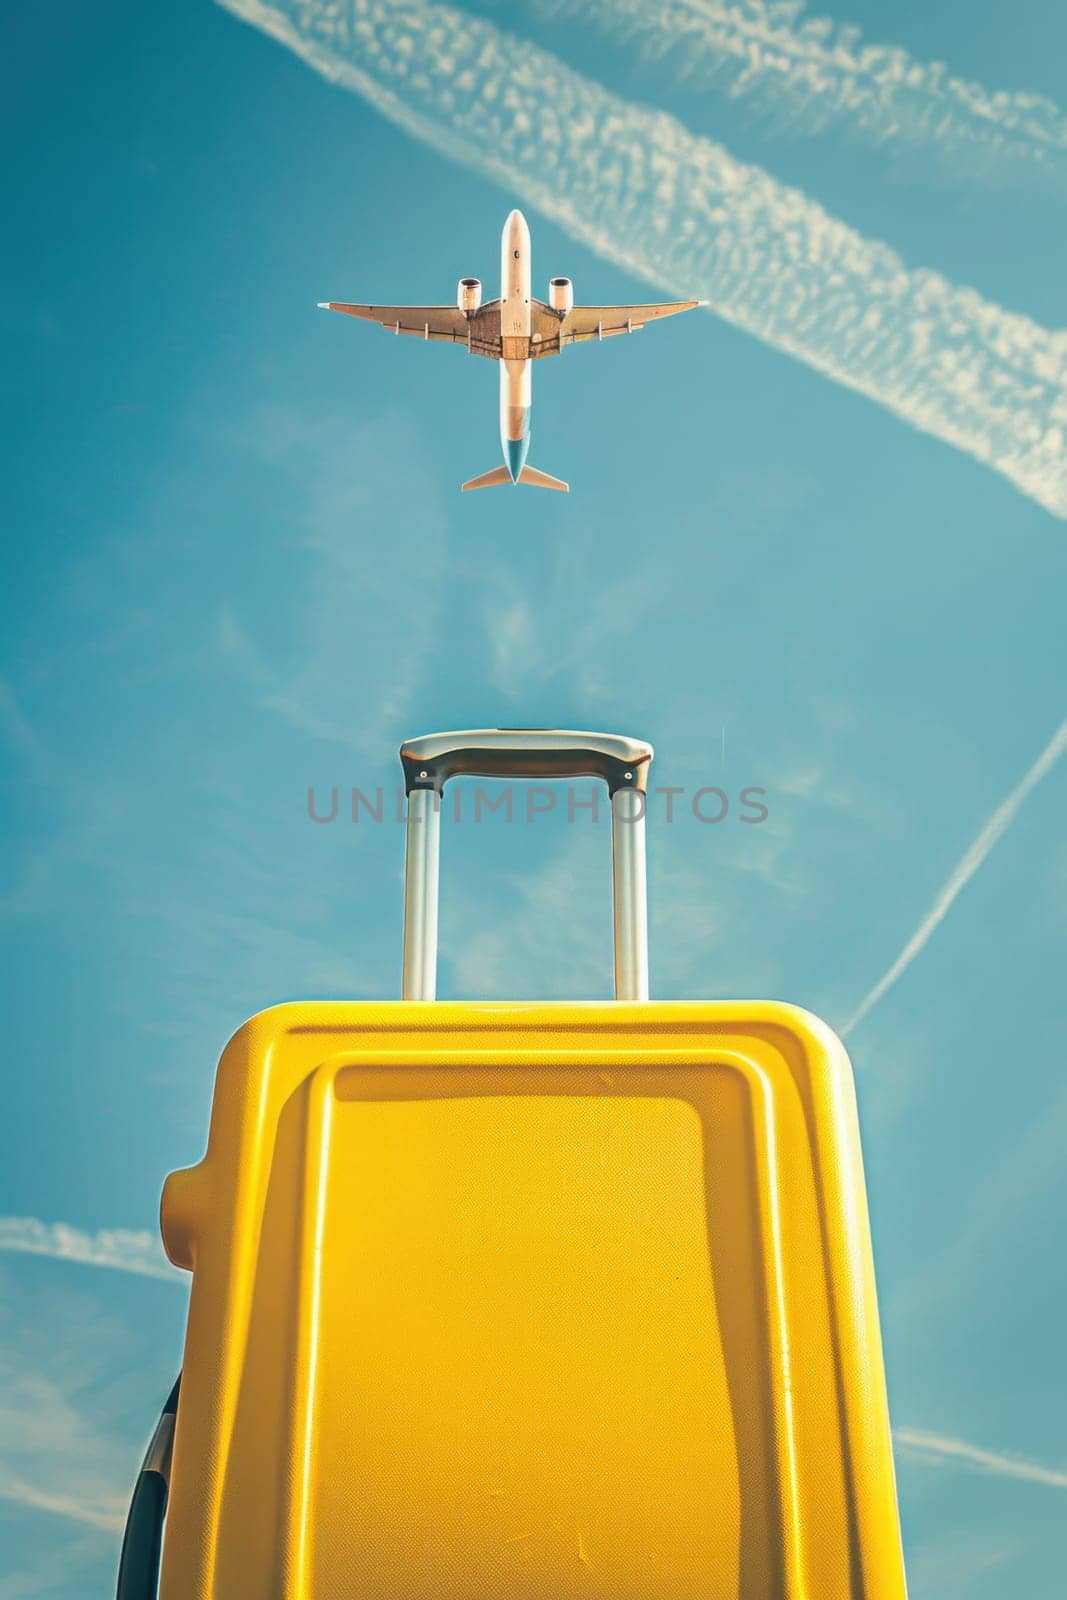 Traveling in style yellow suitcase with plane flying high in the sky above, wanderlust adventure concept photo